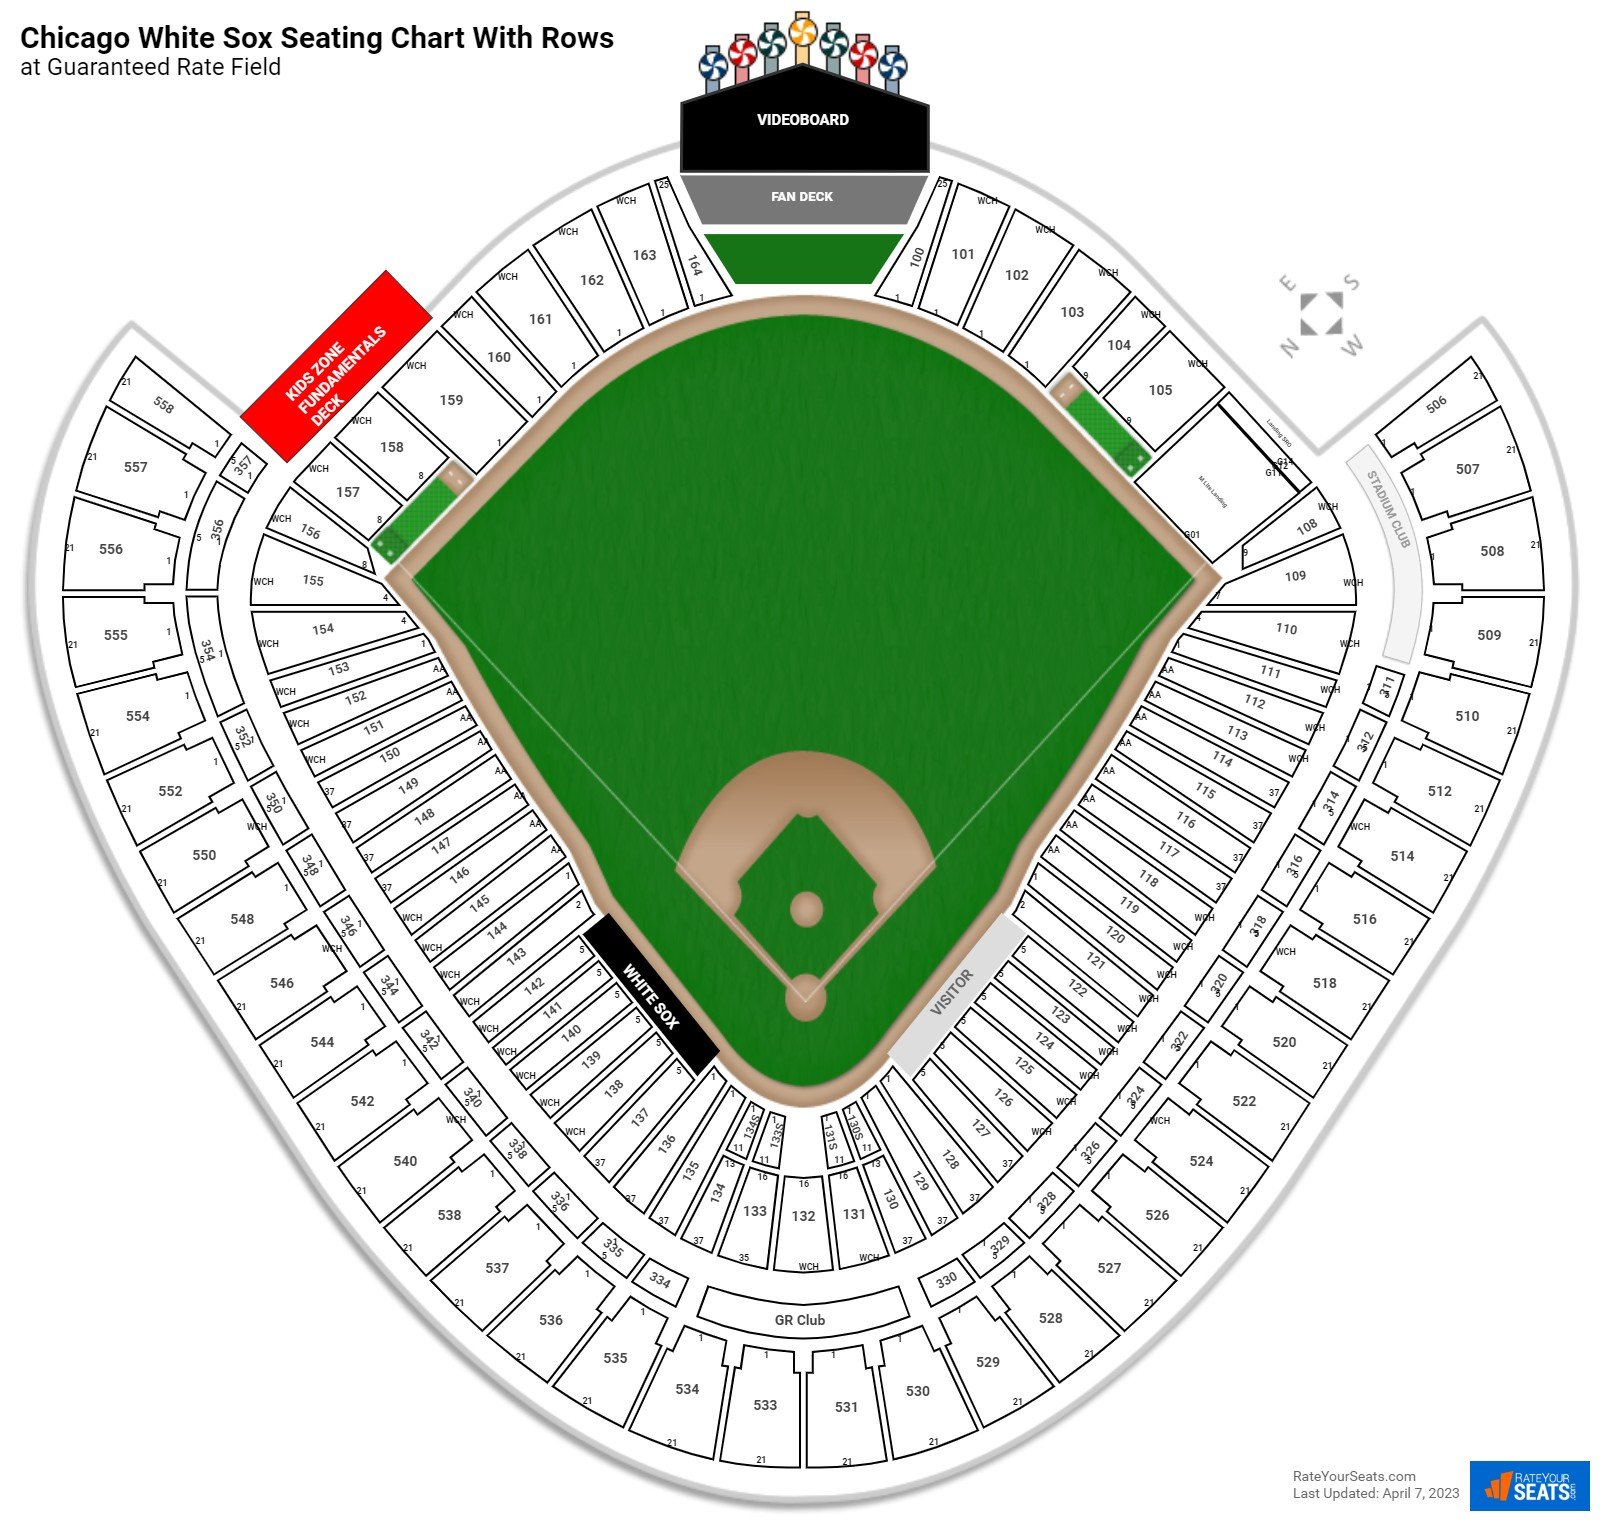 Guaranteed Rate Field seating chart with row numbers